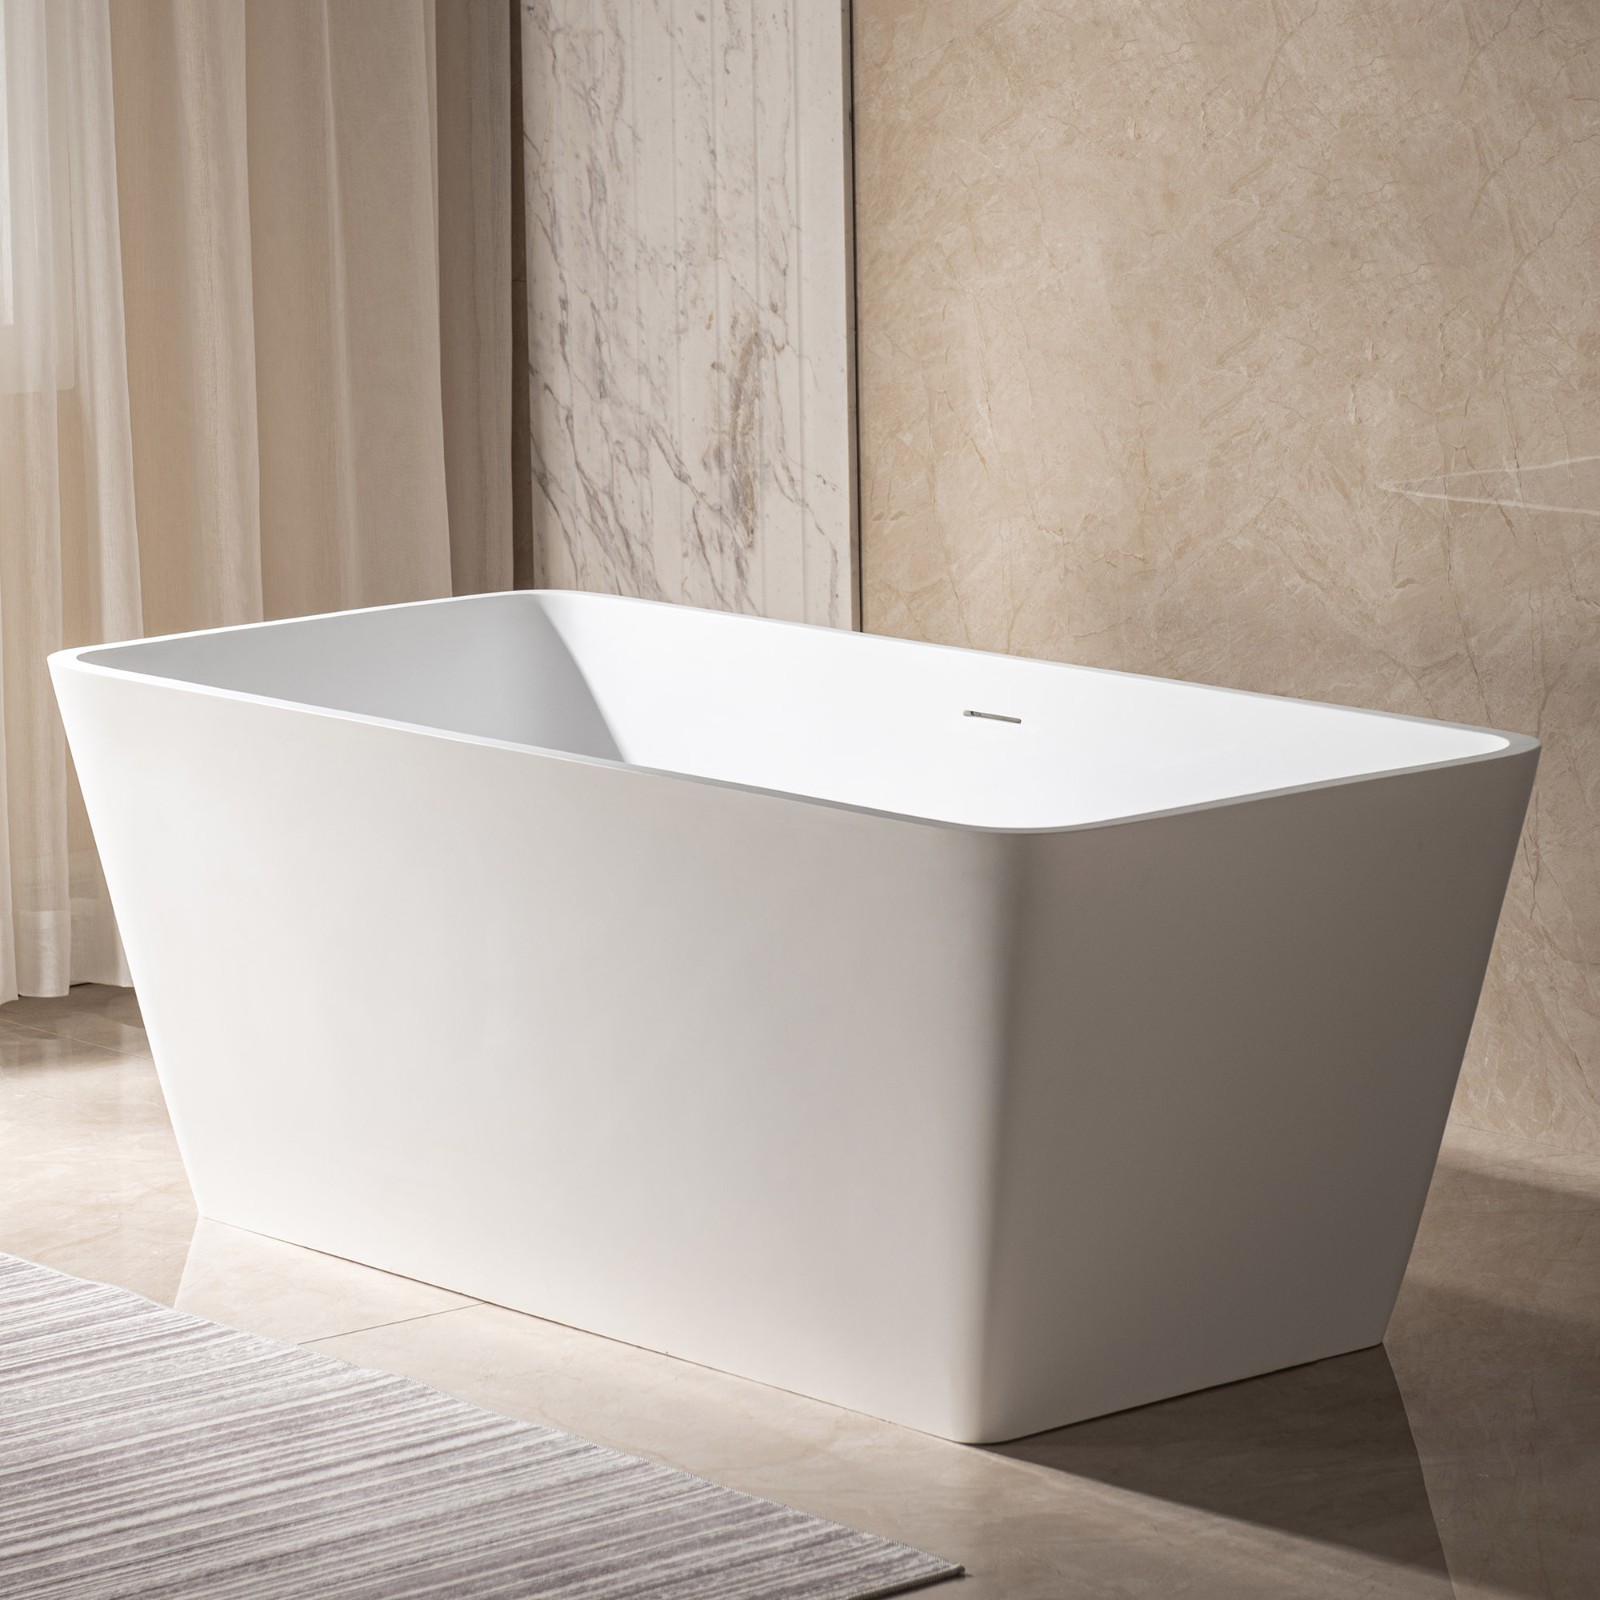  WOODBRIDGE 59 in. x 27.5 in. Luxury Contemporary Solid Surface Freestanding Bathtub in Matte White_5